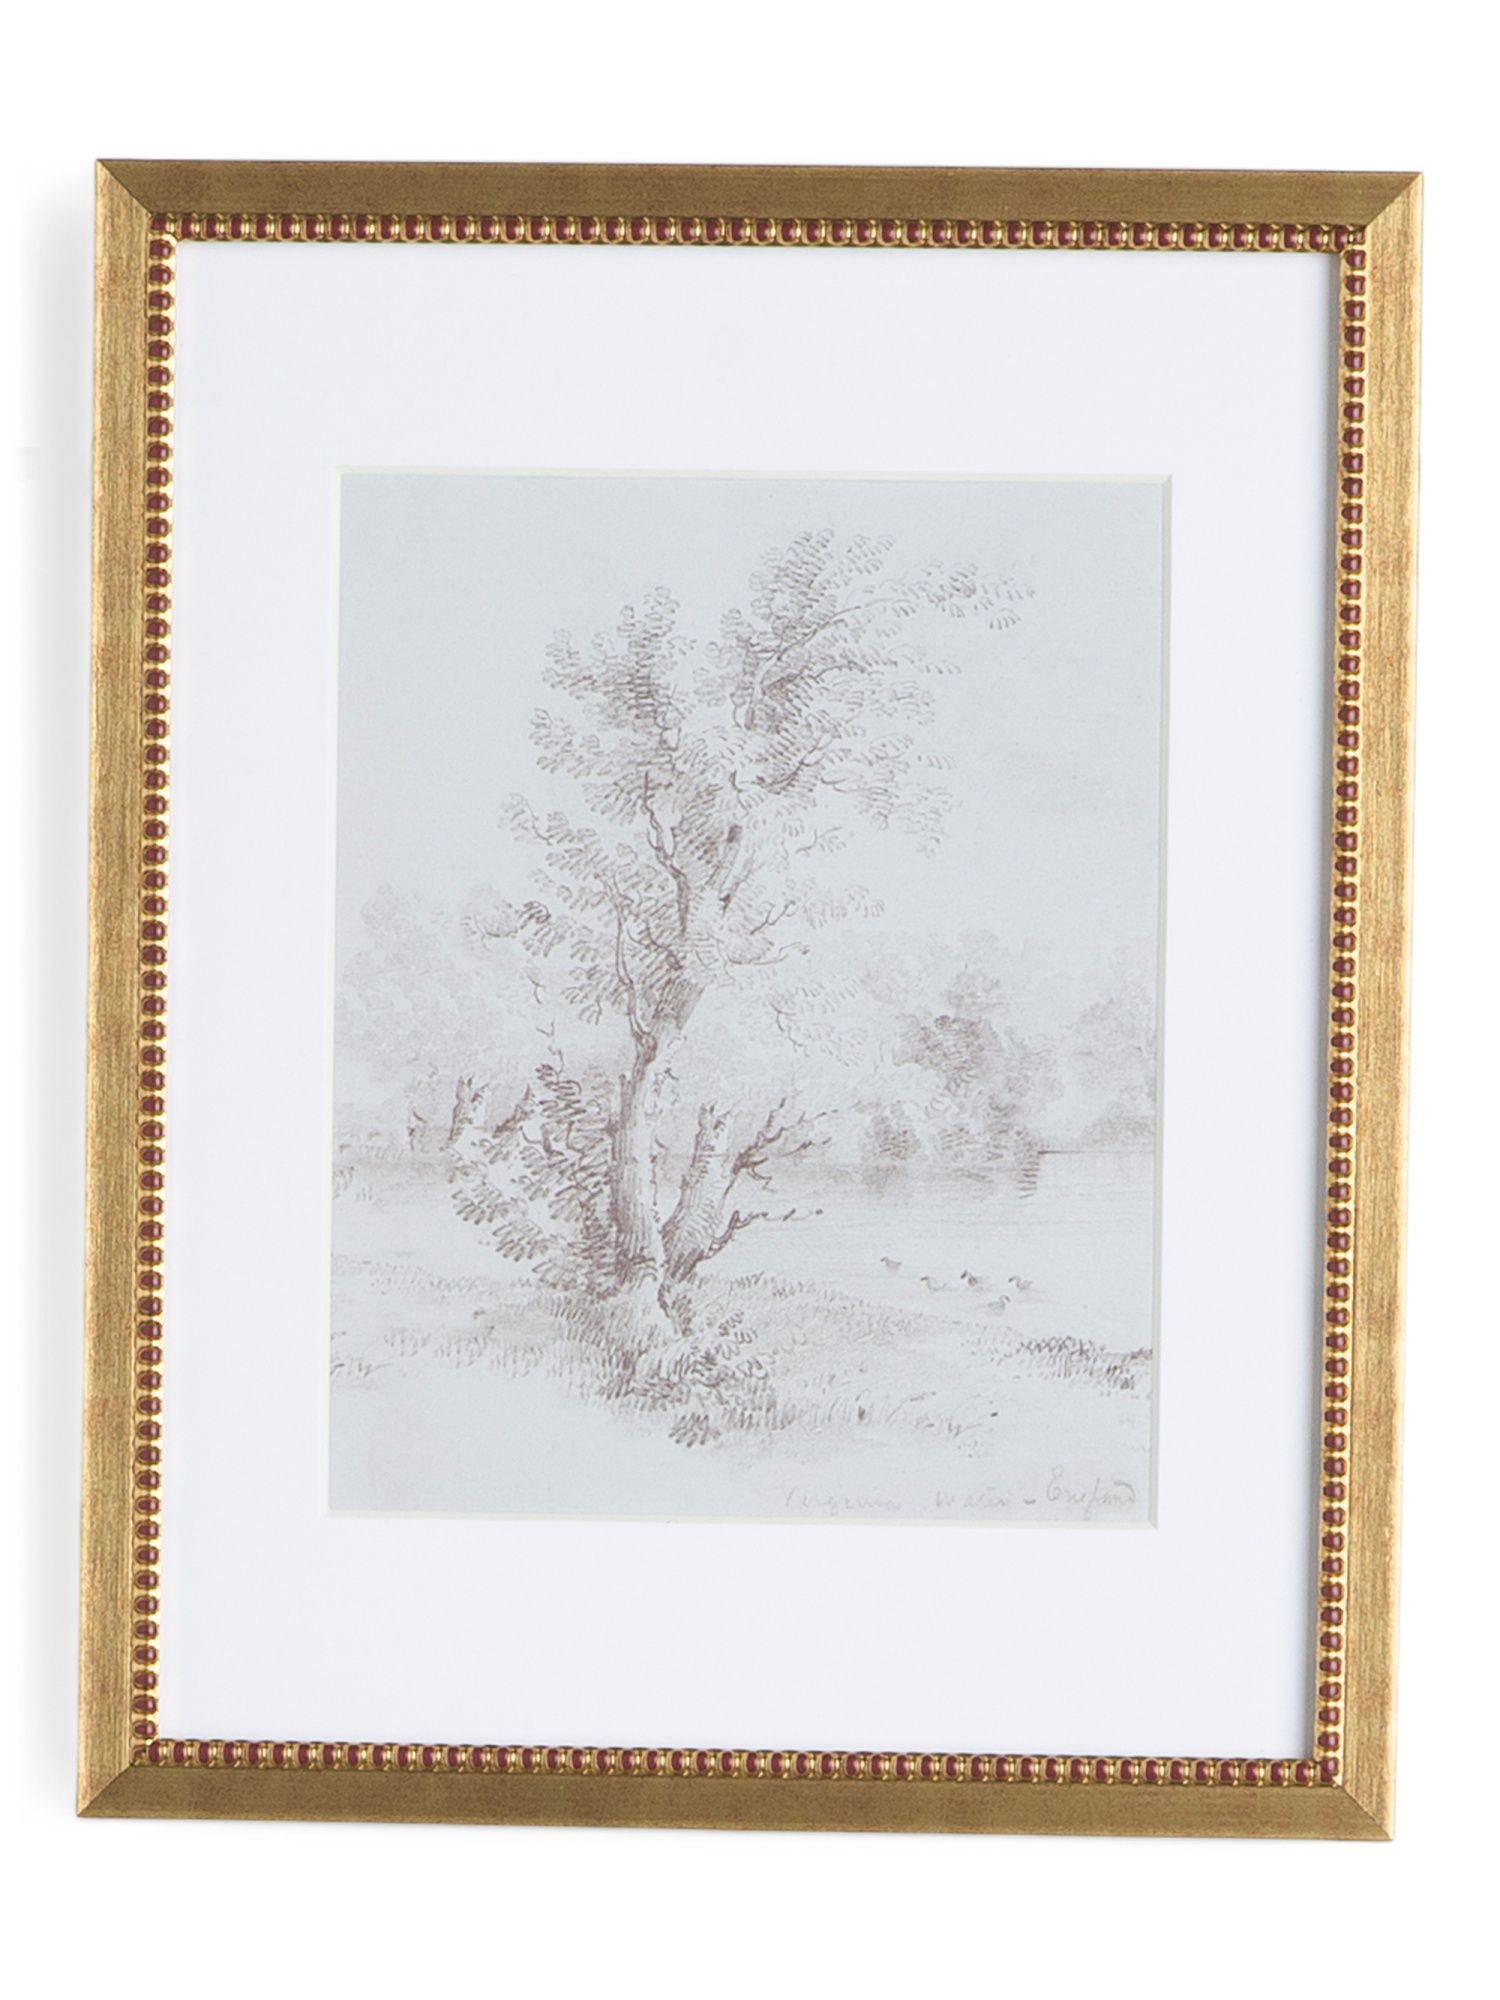 11x14 Matted To 8x10 Antique Look Wall Frame | TJ Maxx